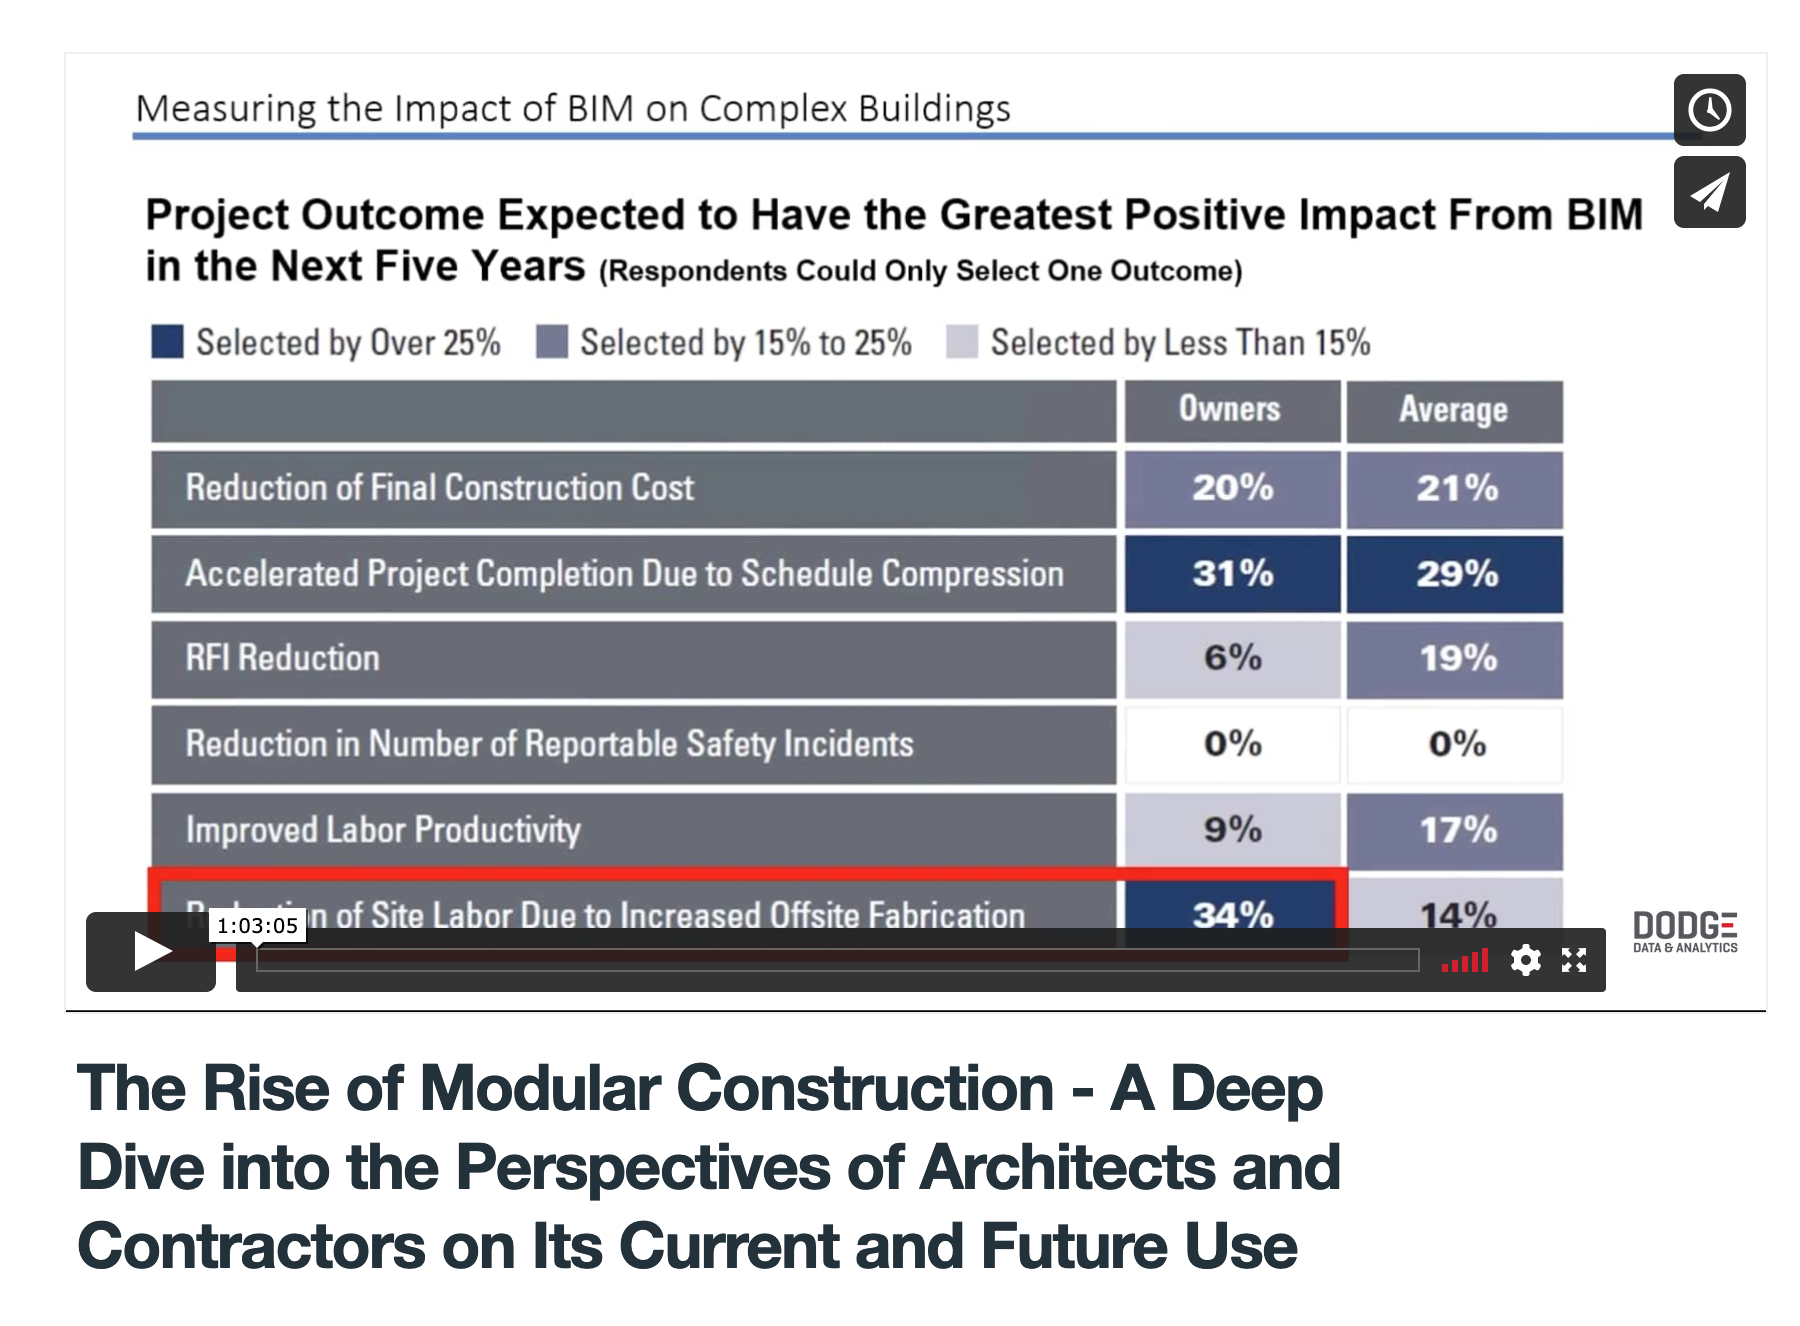 The Rise of Modular Construction